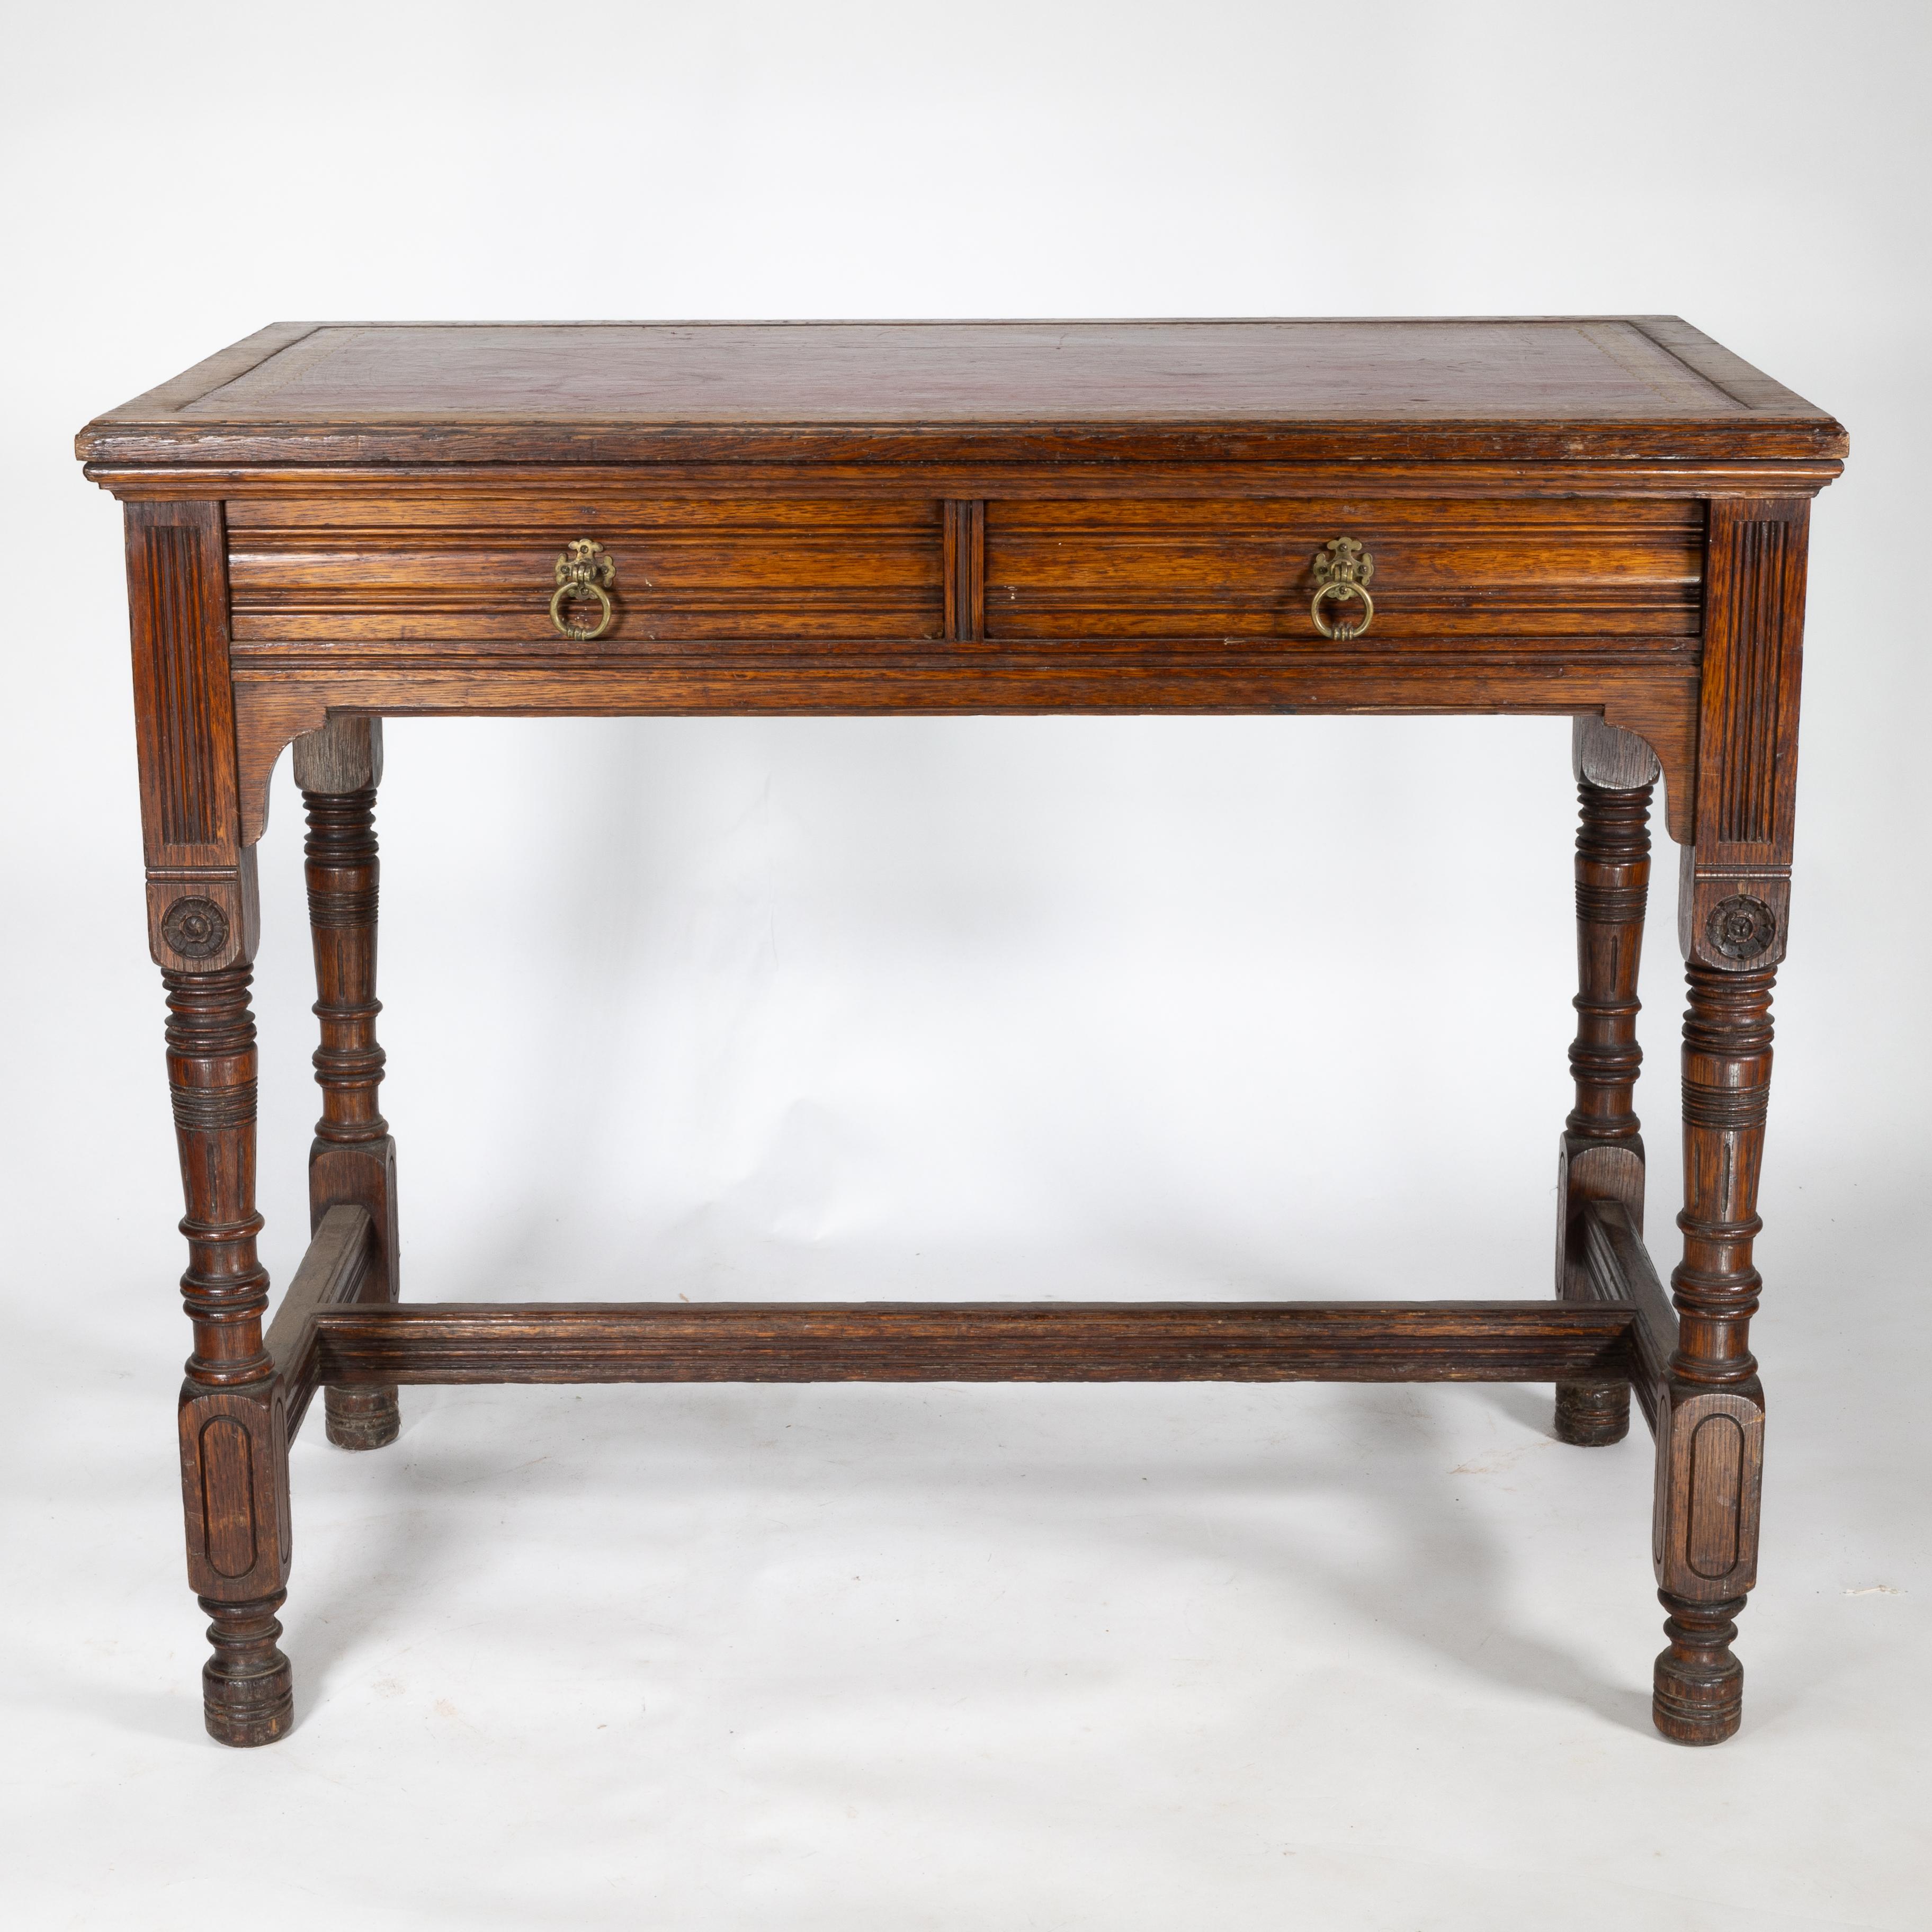 Bruce Talbert (1838-1881) for Gillow and Co., an oak two-drawer writing table, with a later red leather top, stamped mark, no. L9534.